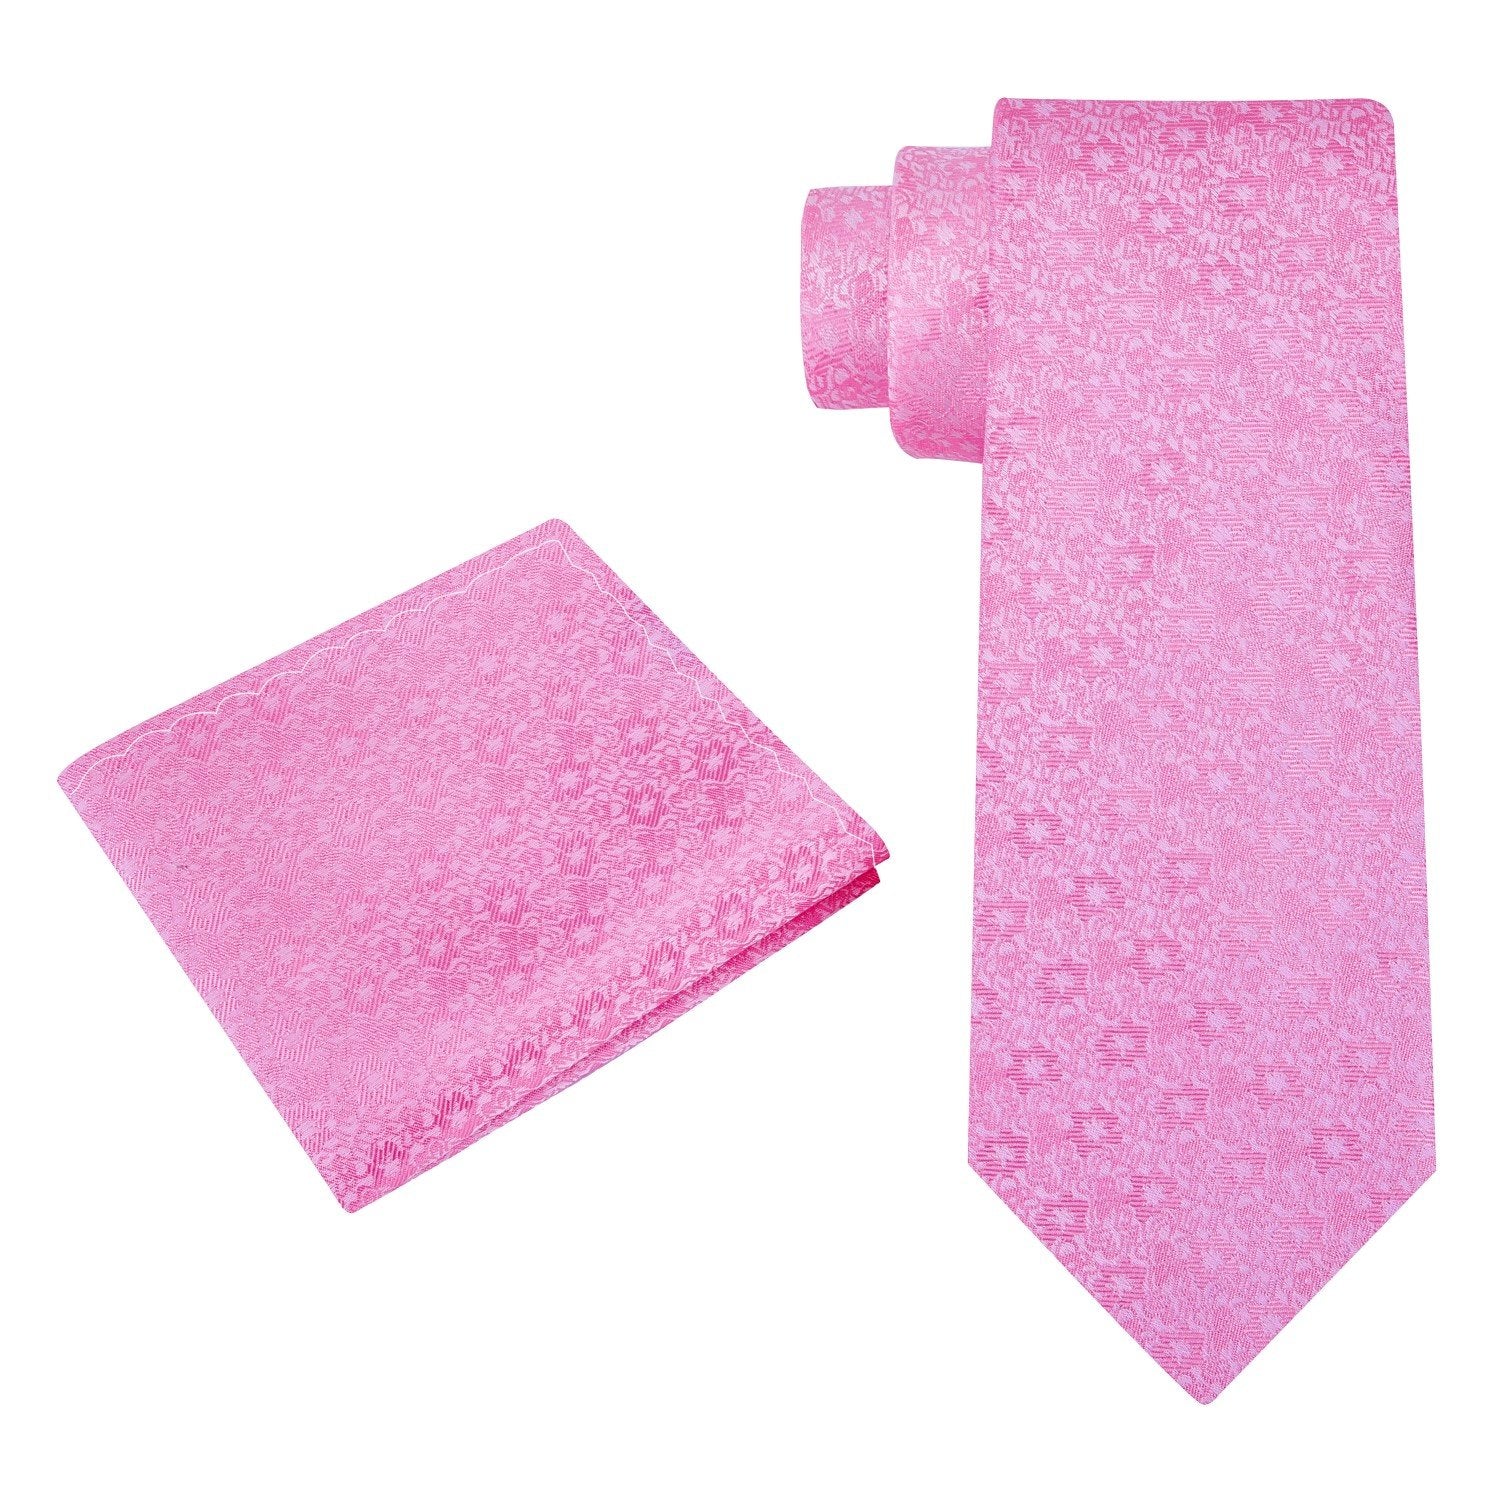 Alt View: A Solid Pink Shimmer Pattern Silk Necktie, Matching Pocket Square